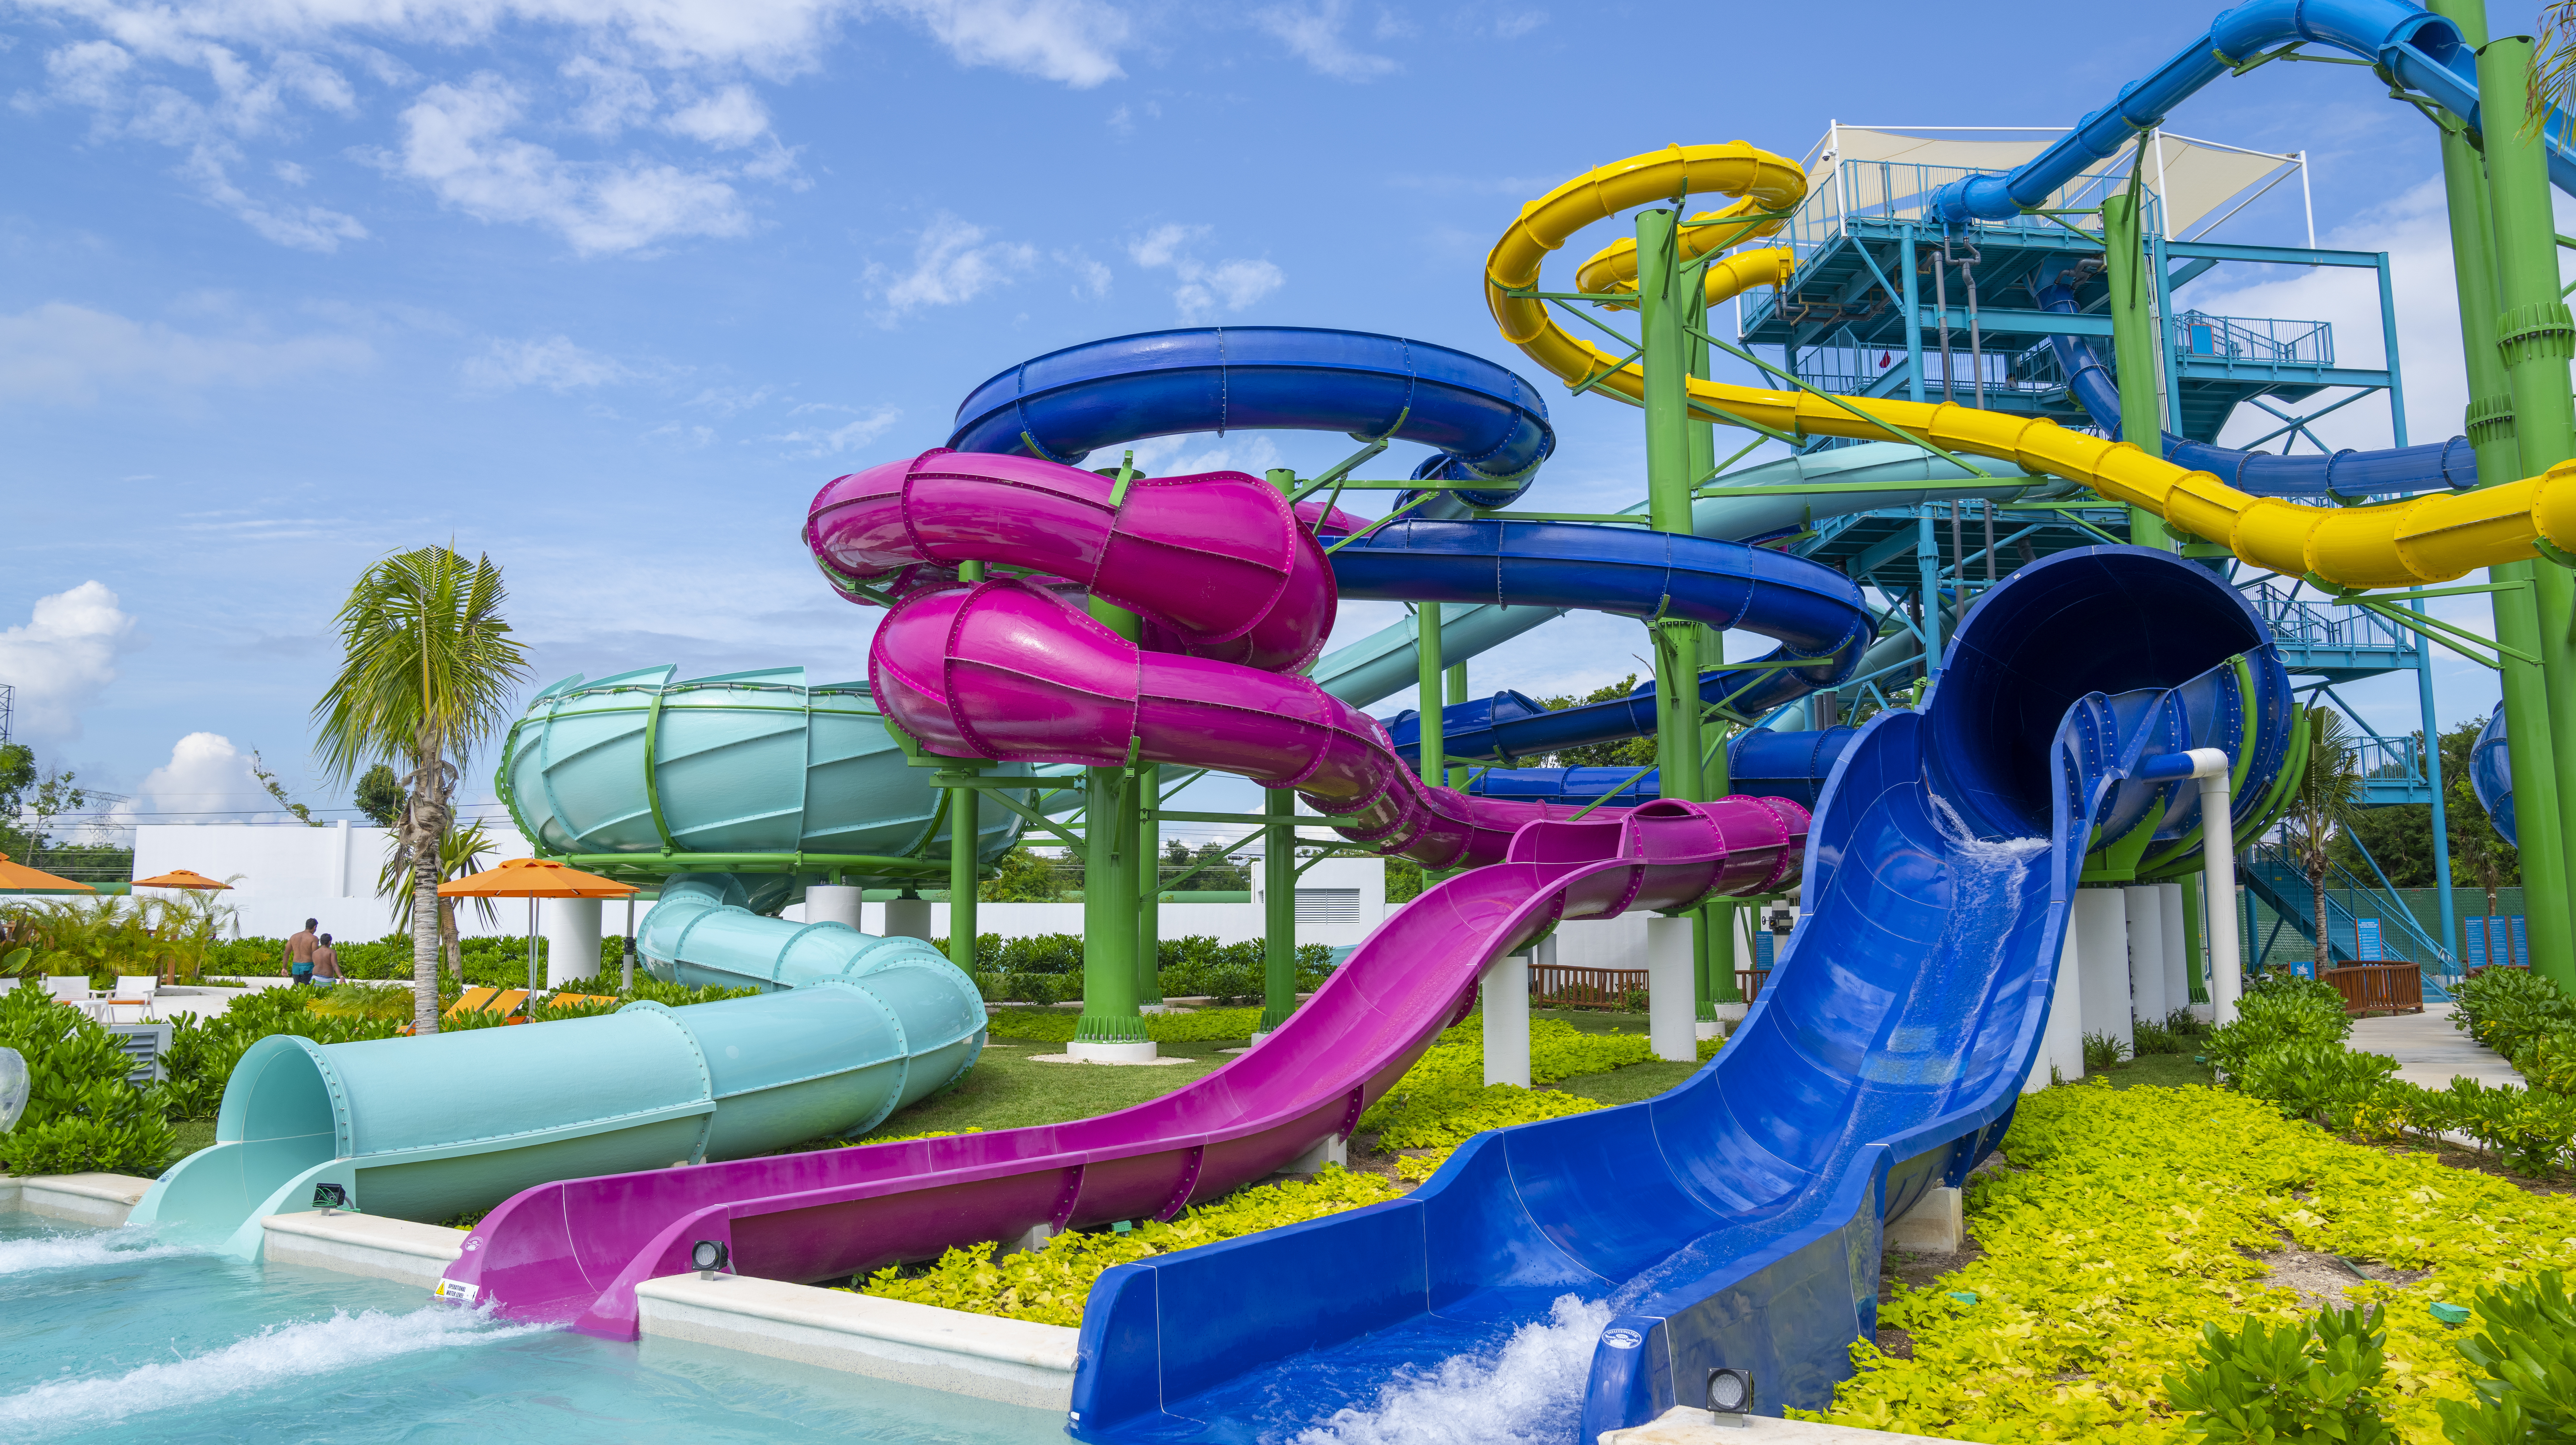 Slide Tower, AquaNick at Nickelodeon Hotel and Resort, Cancun, Mexico